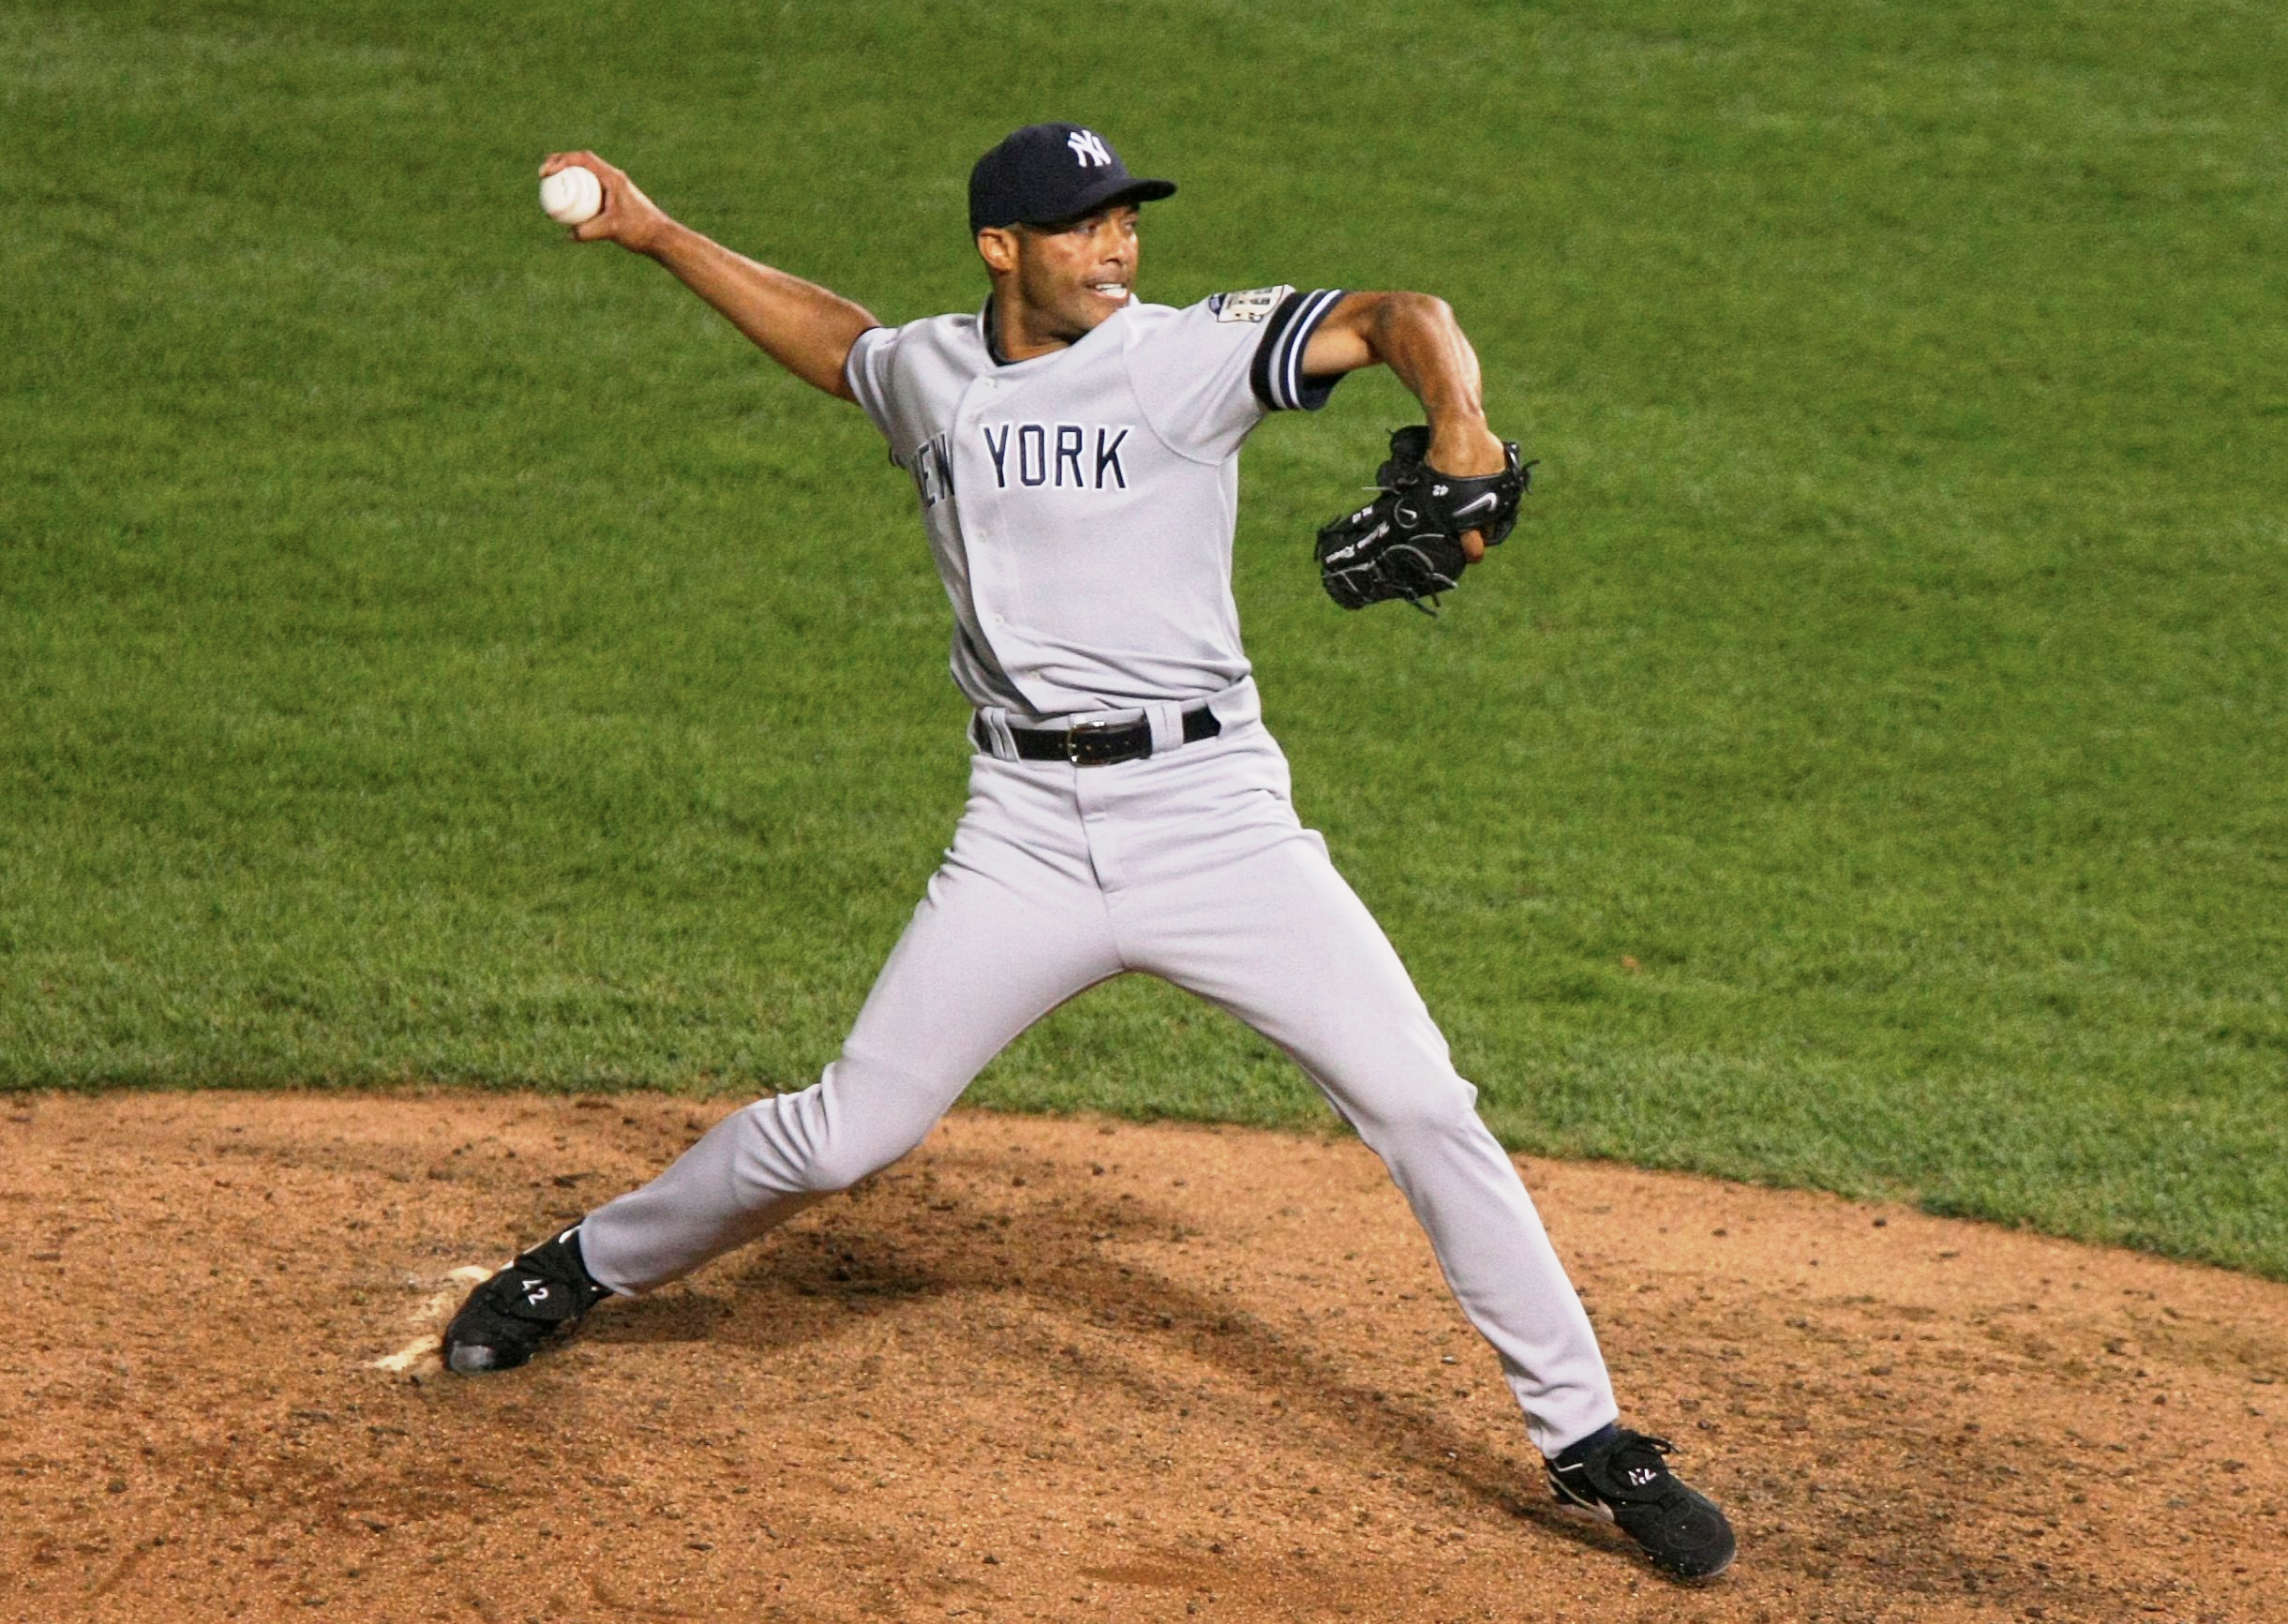 Mariano Rivera pitching in Baltimore on 8-22-08.jpeg. 